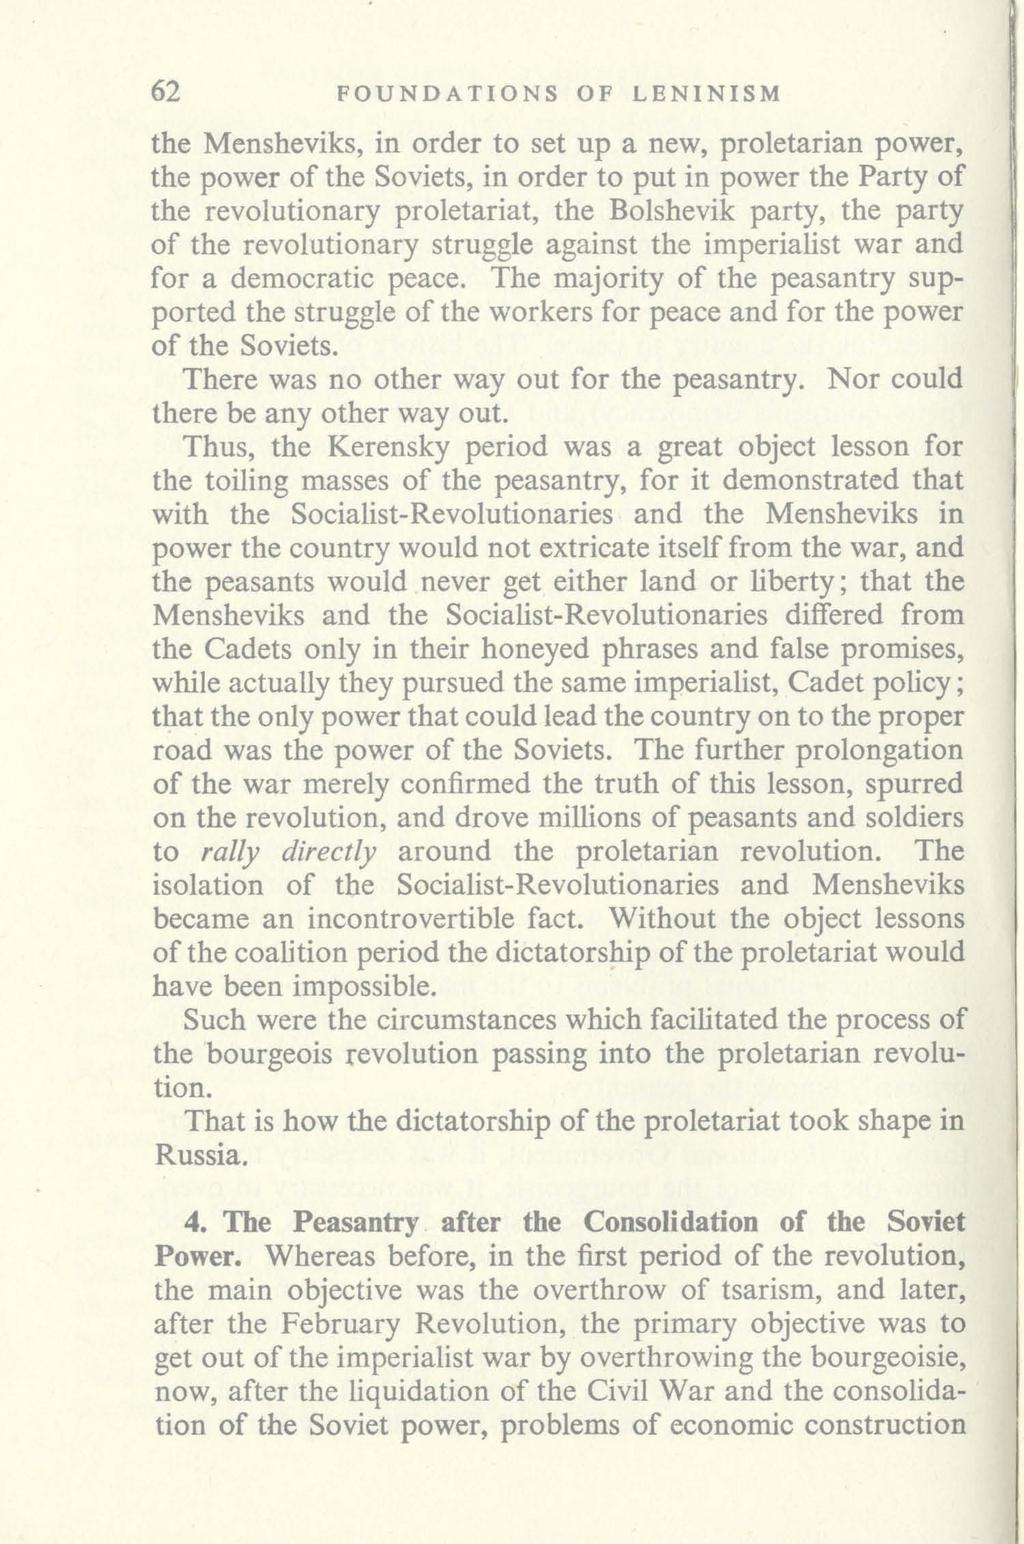 62 FOUNDATIONS OF LENINISM the Mensheviks, in order to set up a new, proletarian power, the power of the Soviets, in order to put in power the Party of the revolutionary proletariat, the Bolshevik